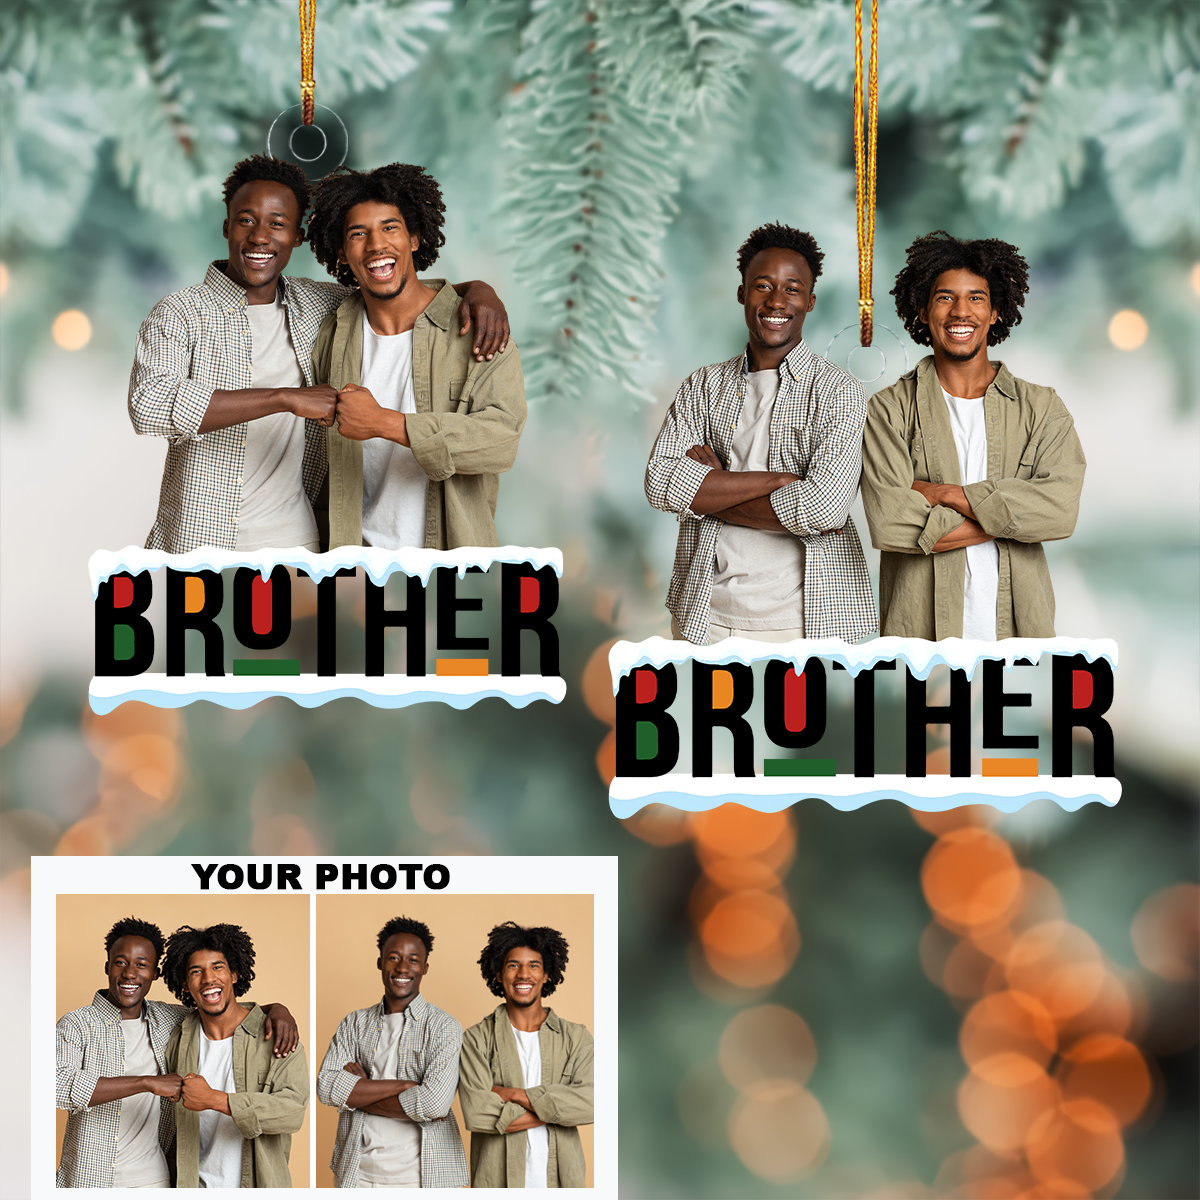 Customized Photo Ornament Brothers - Personalized Photo Mica Ornament - Christmas Gift For Brothers UPL0HD017